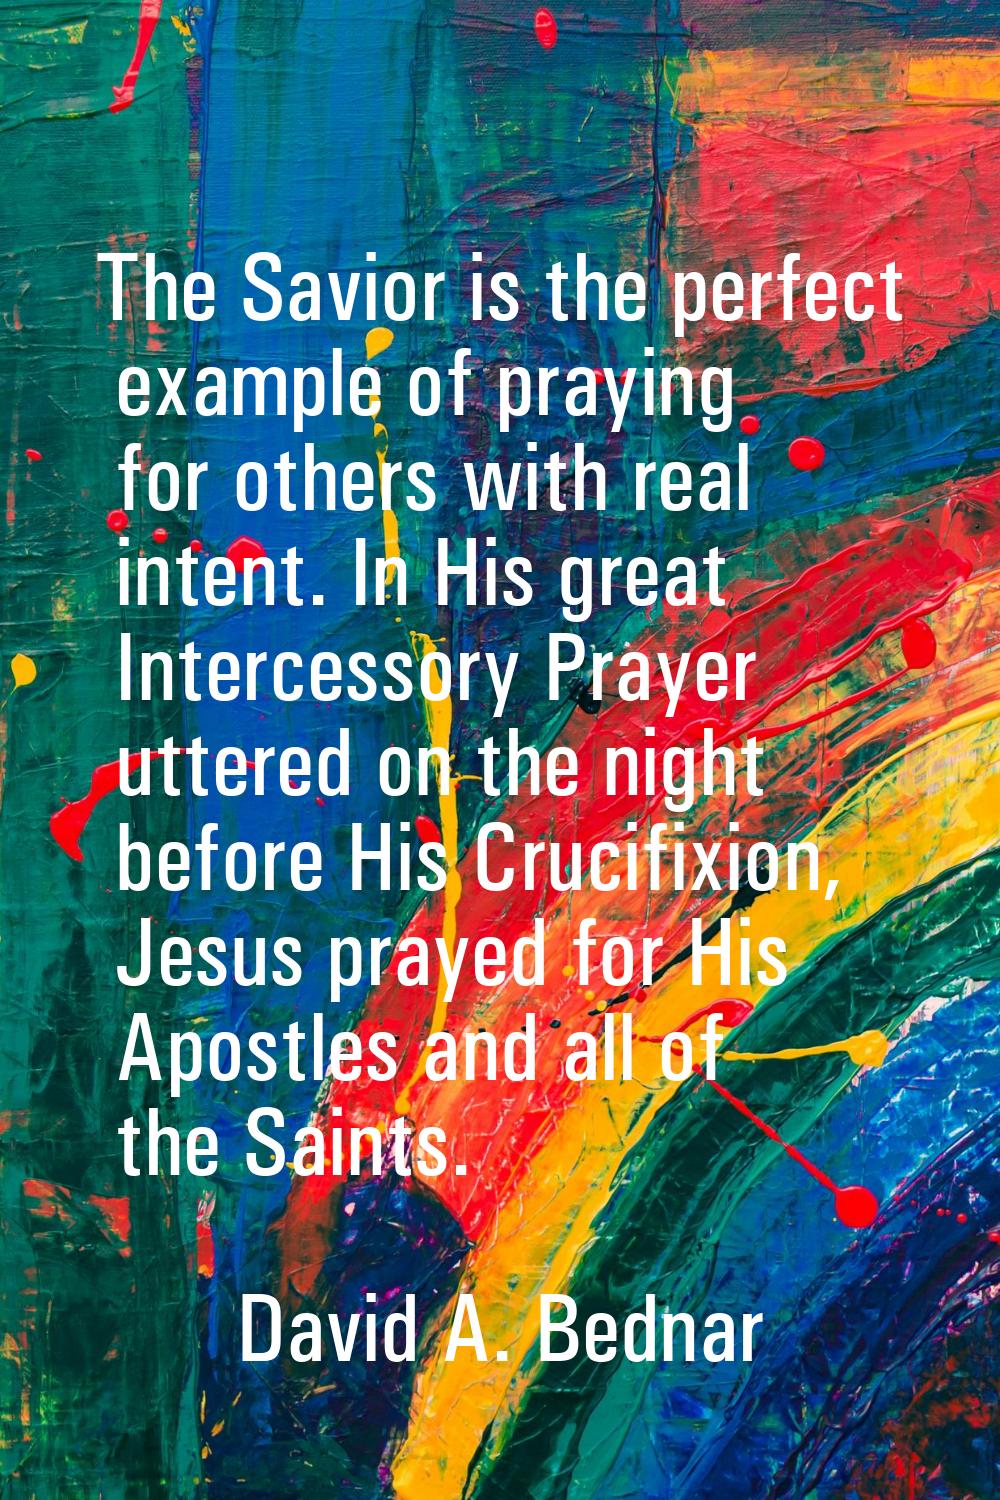 The Savior is the perfect example of praying for others with real intent. In His great Intercessory